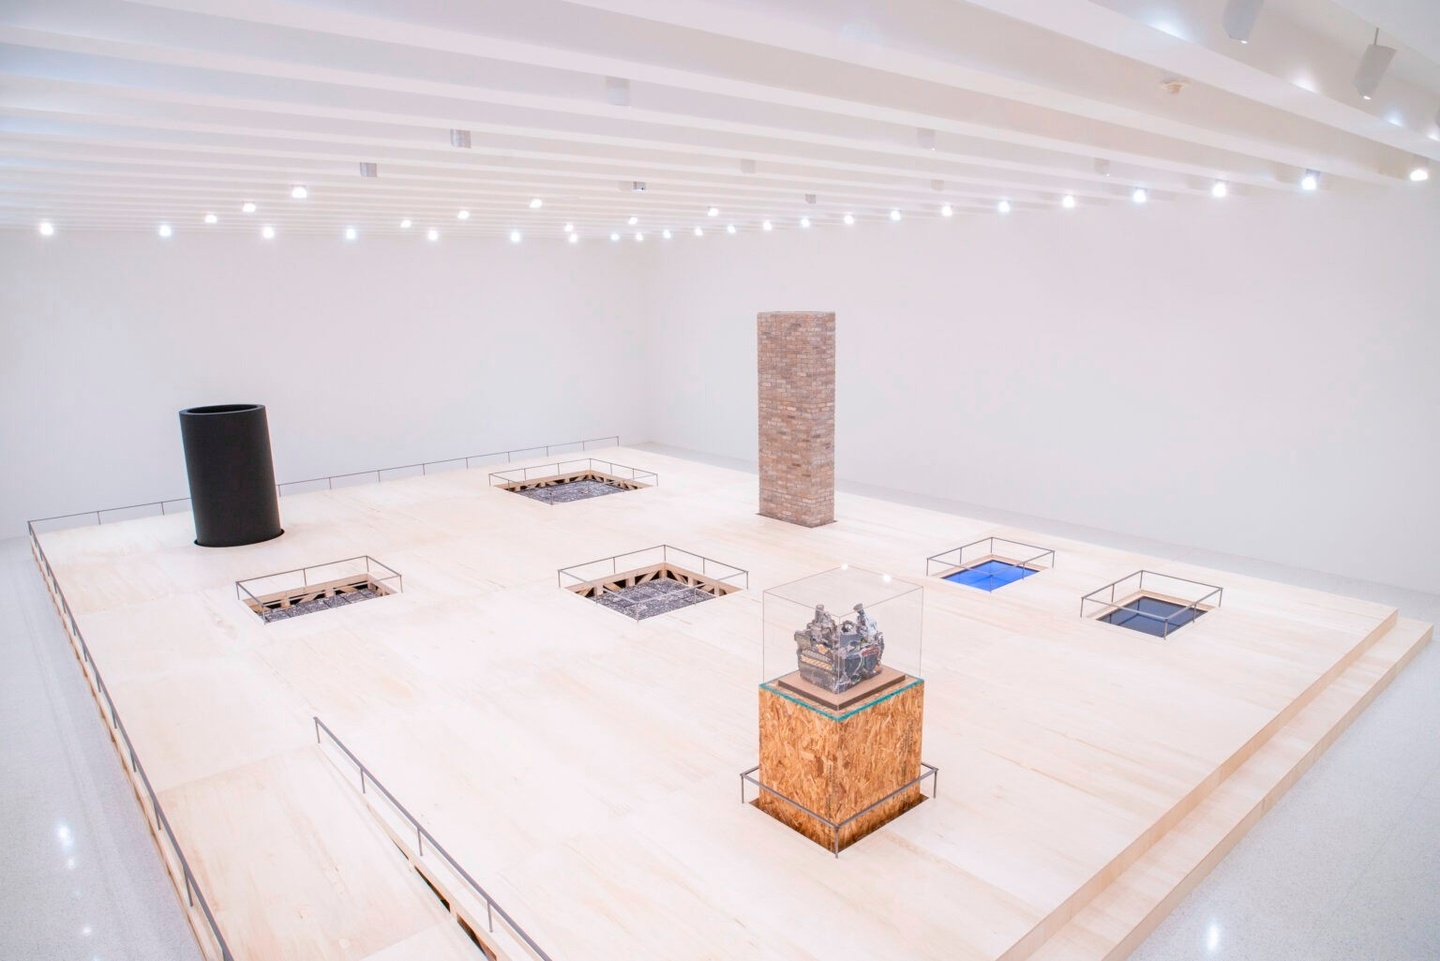 Installation view of “Kahlil Robert Irving: Archaeology of the Present” at the Walker Art Center.